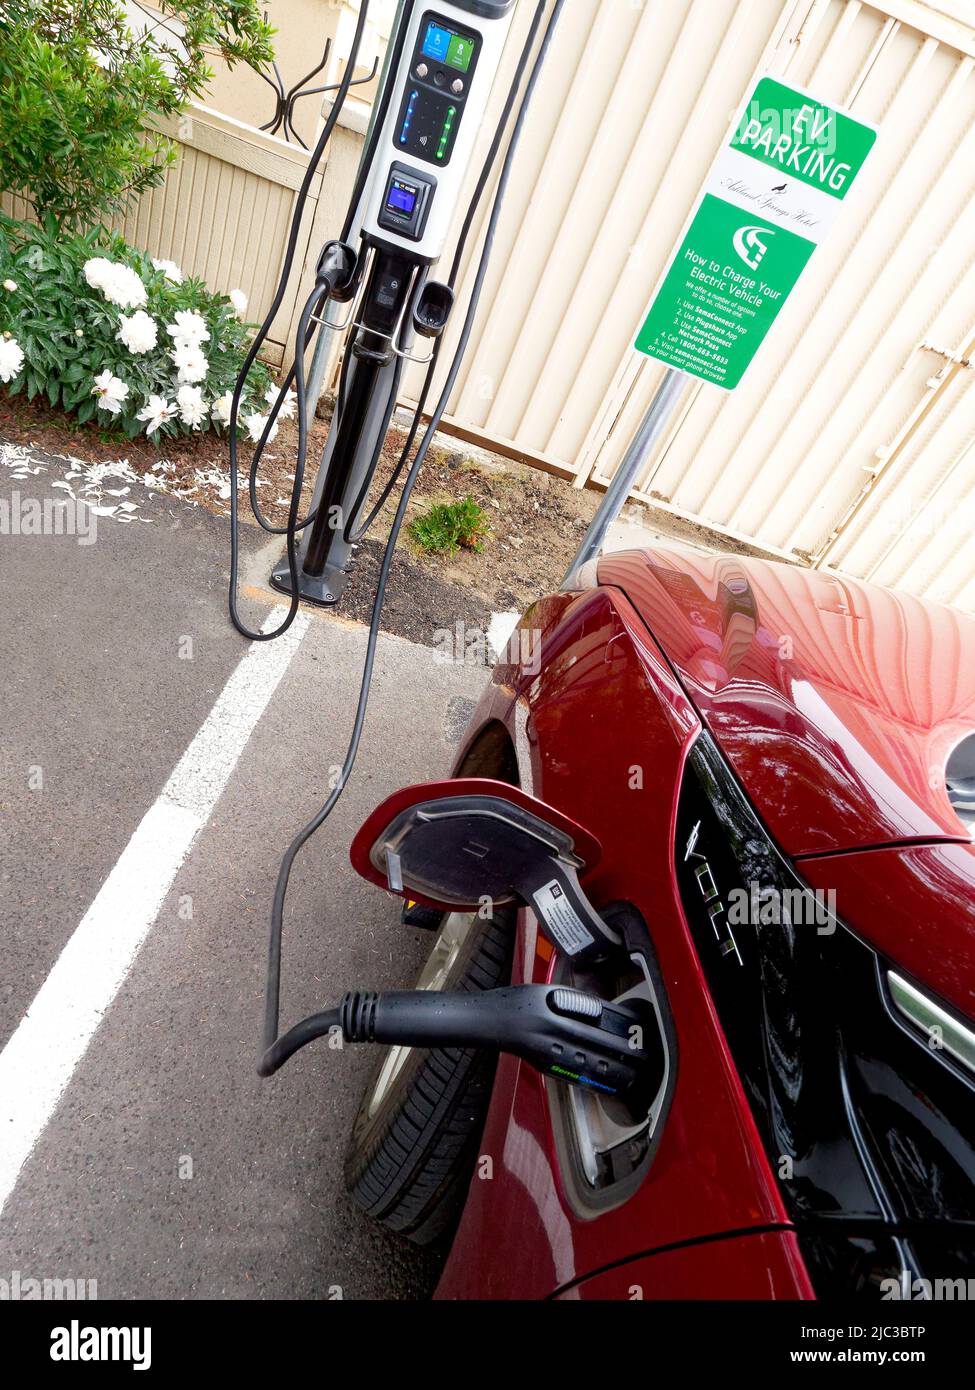 In Ashland, Oregon, the hotel Ashland Springs provides four charging stations for electric vehicles. Symbol on parking space reserved for the electric cars (Chevrolet Volt seen charging) Stock Photo